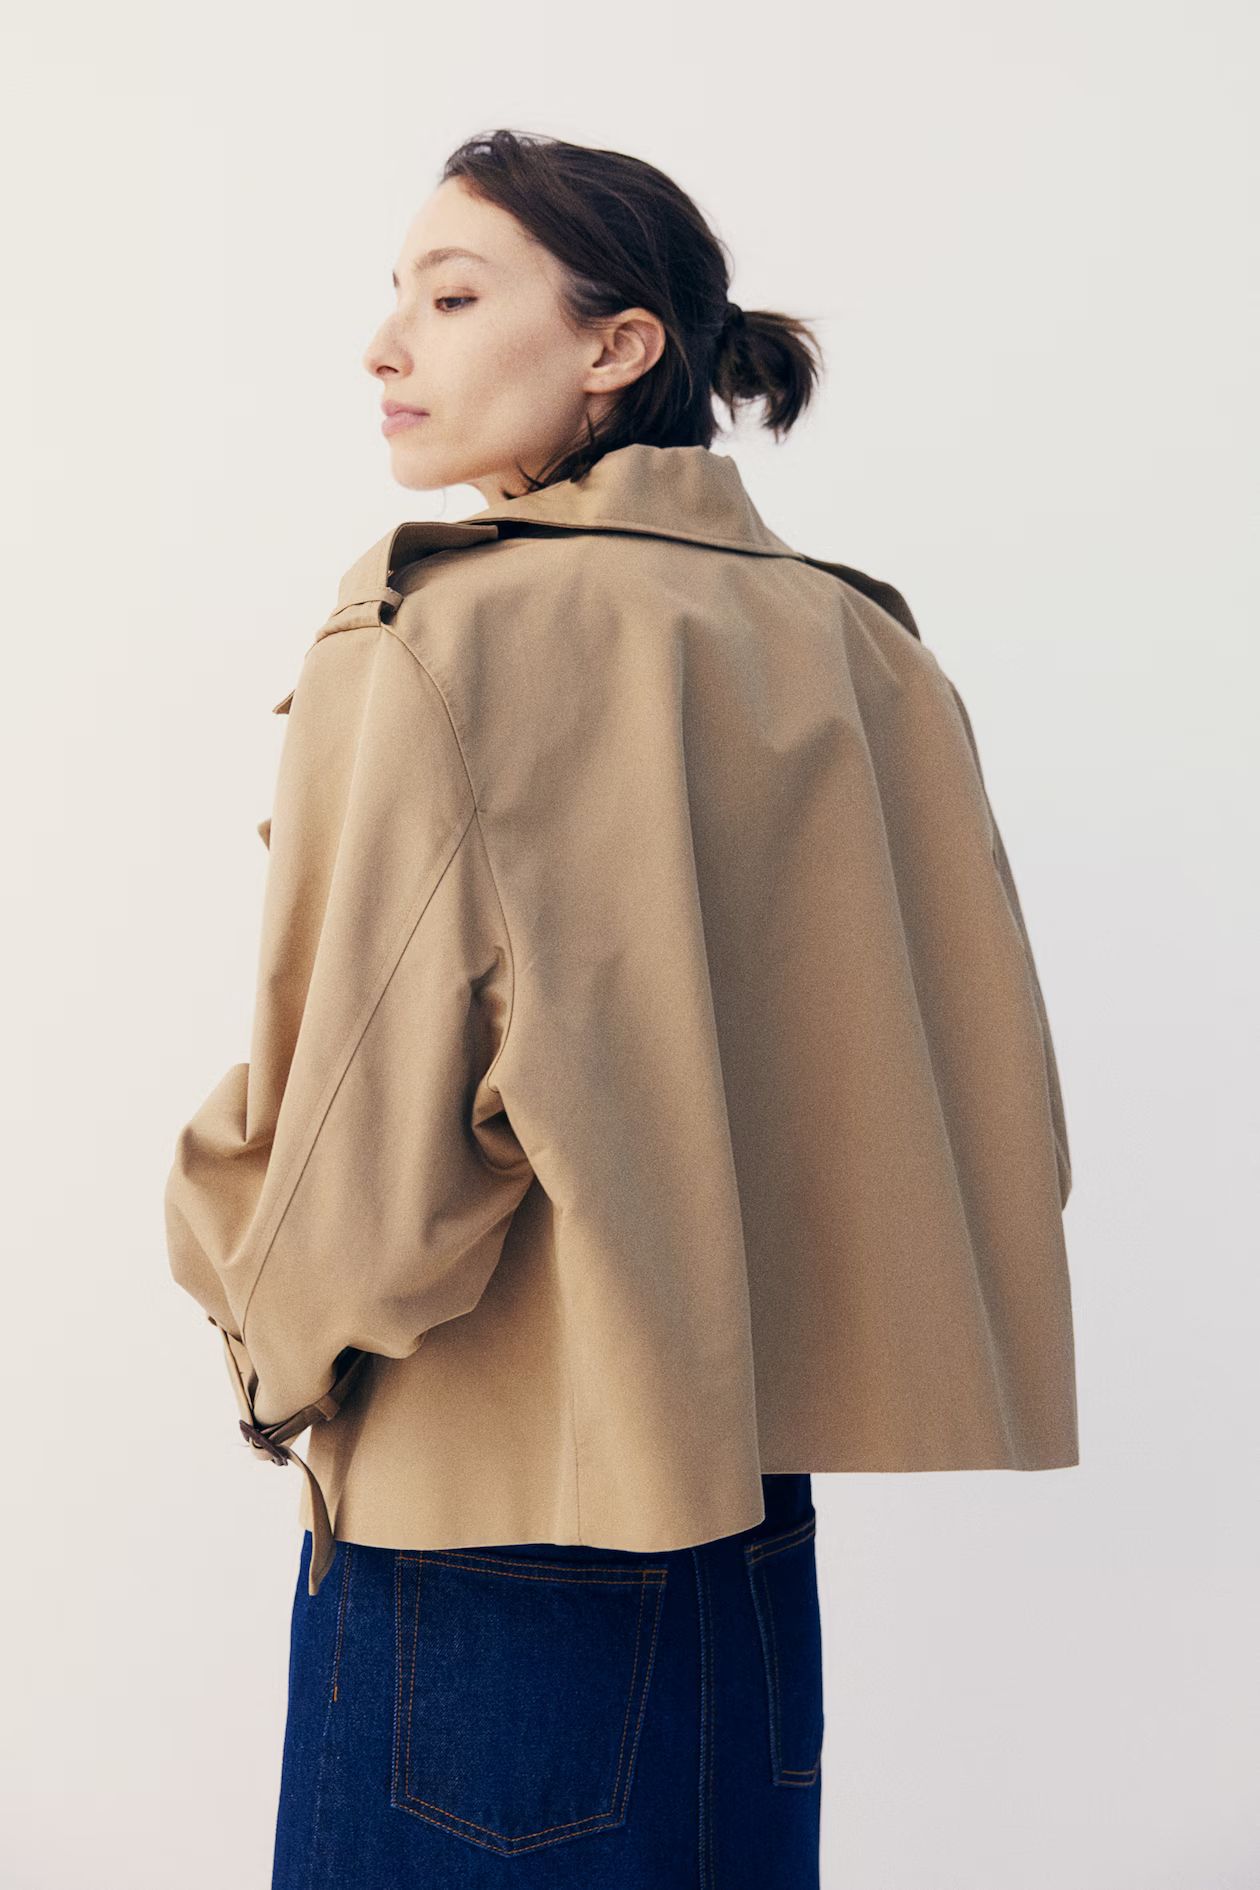 Trenchjacke - Dunkelbeige - Ladies | H&M AT | H&M (DE, AT, CH, NL, FI)